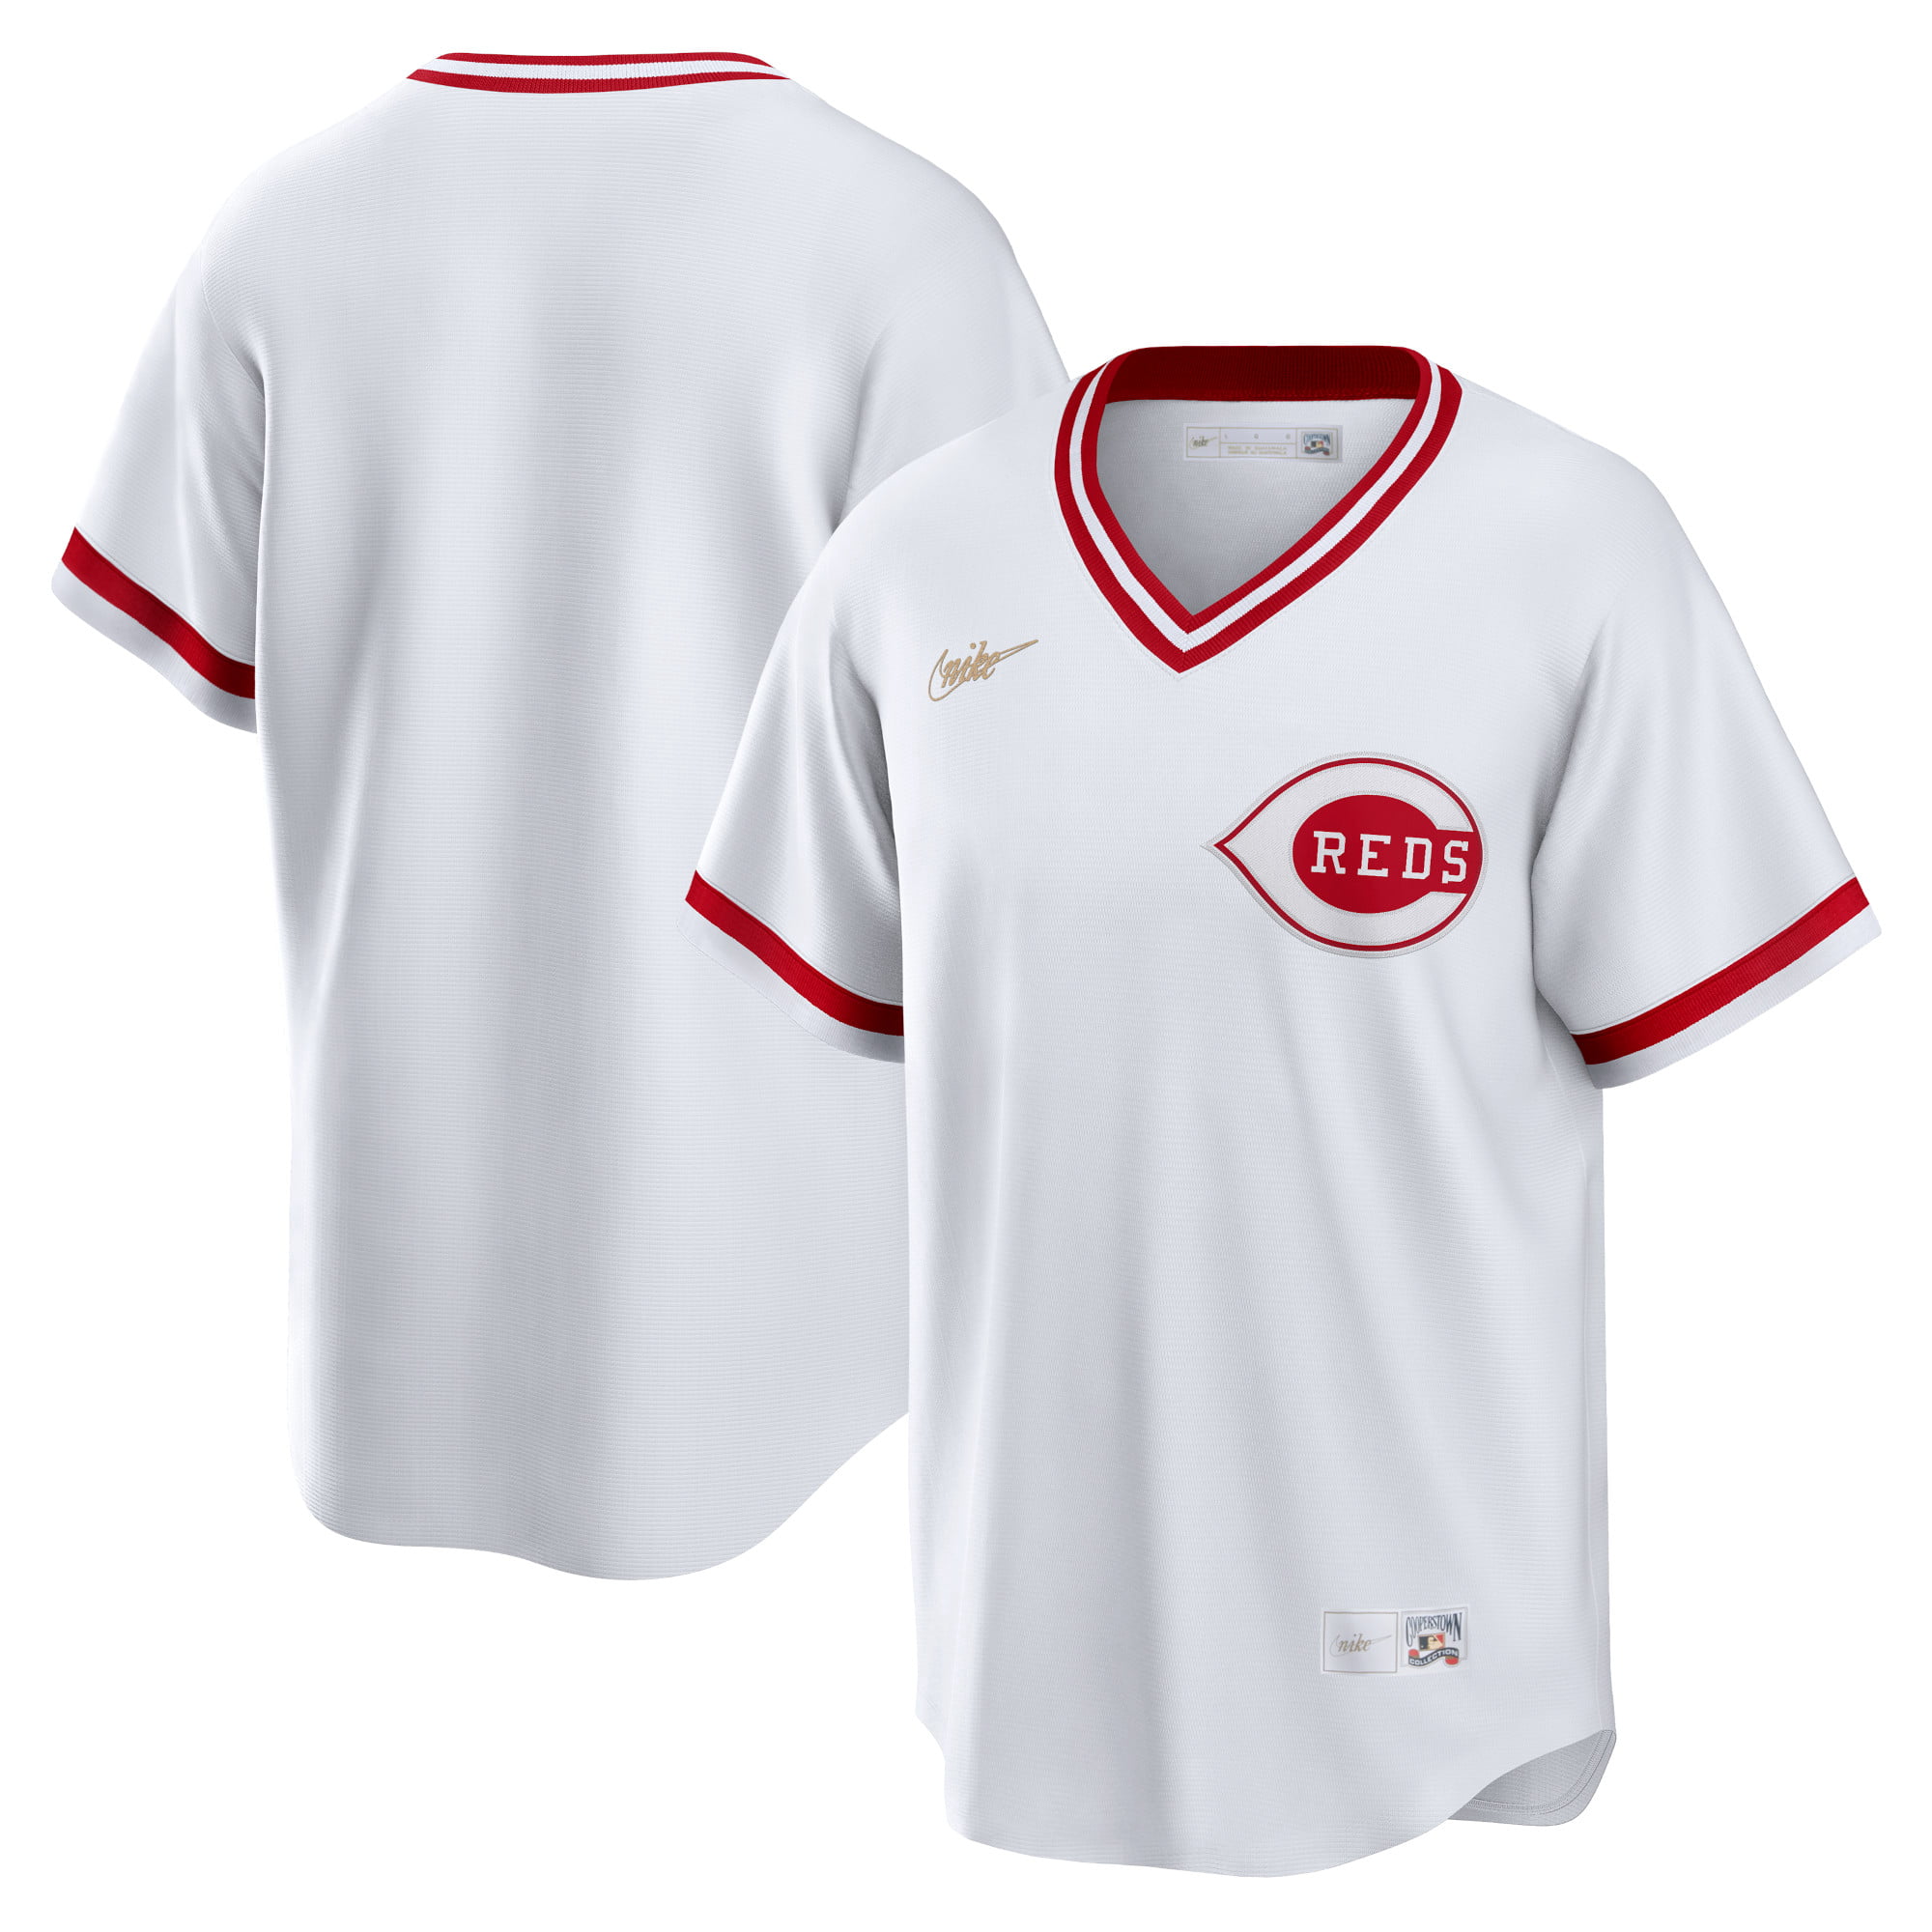 Men's Nike White Cincinnati Reds Home Cooperstown Collection Team Jersey 